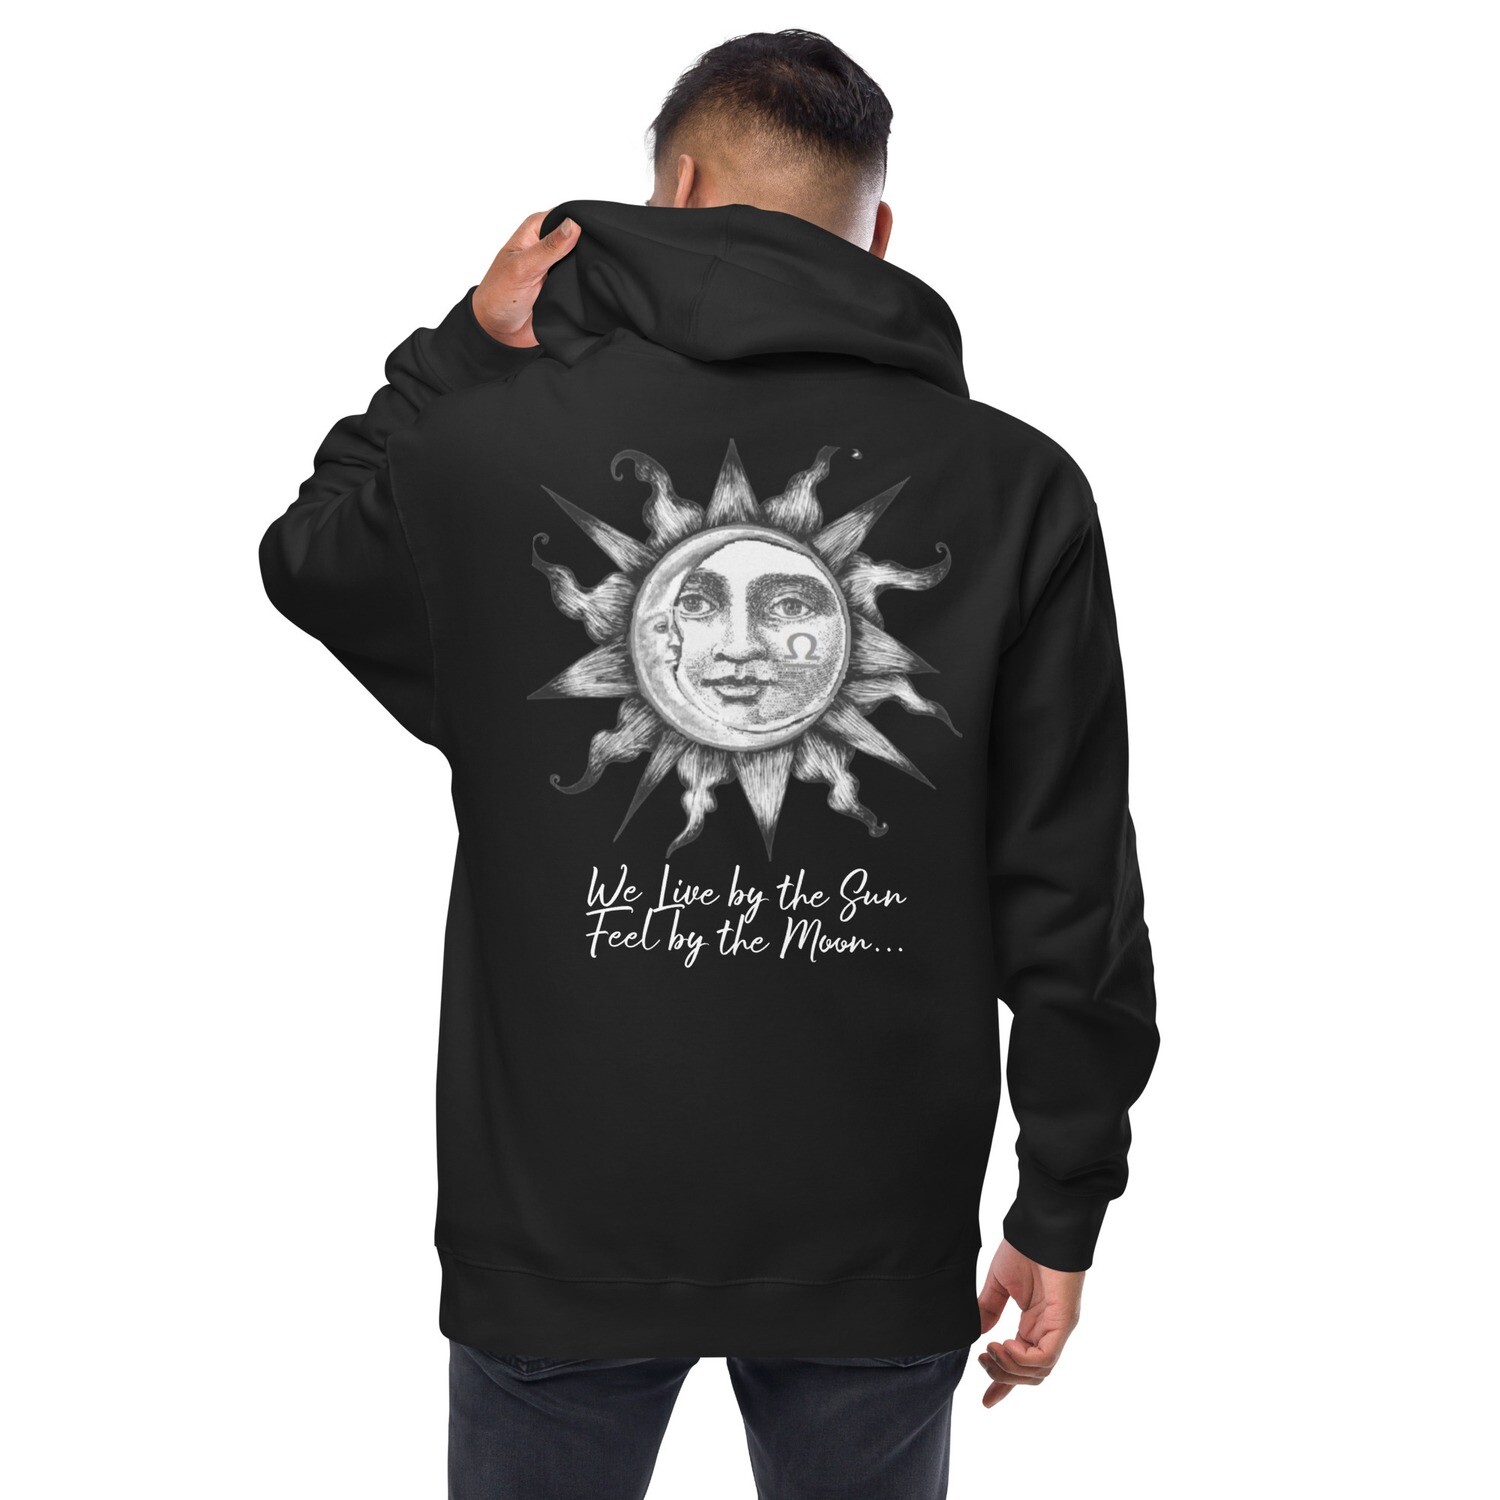 Unisex fleece zip up hoodie - We Live by the Sun Feel by the Moon